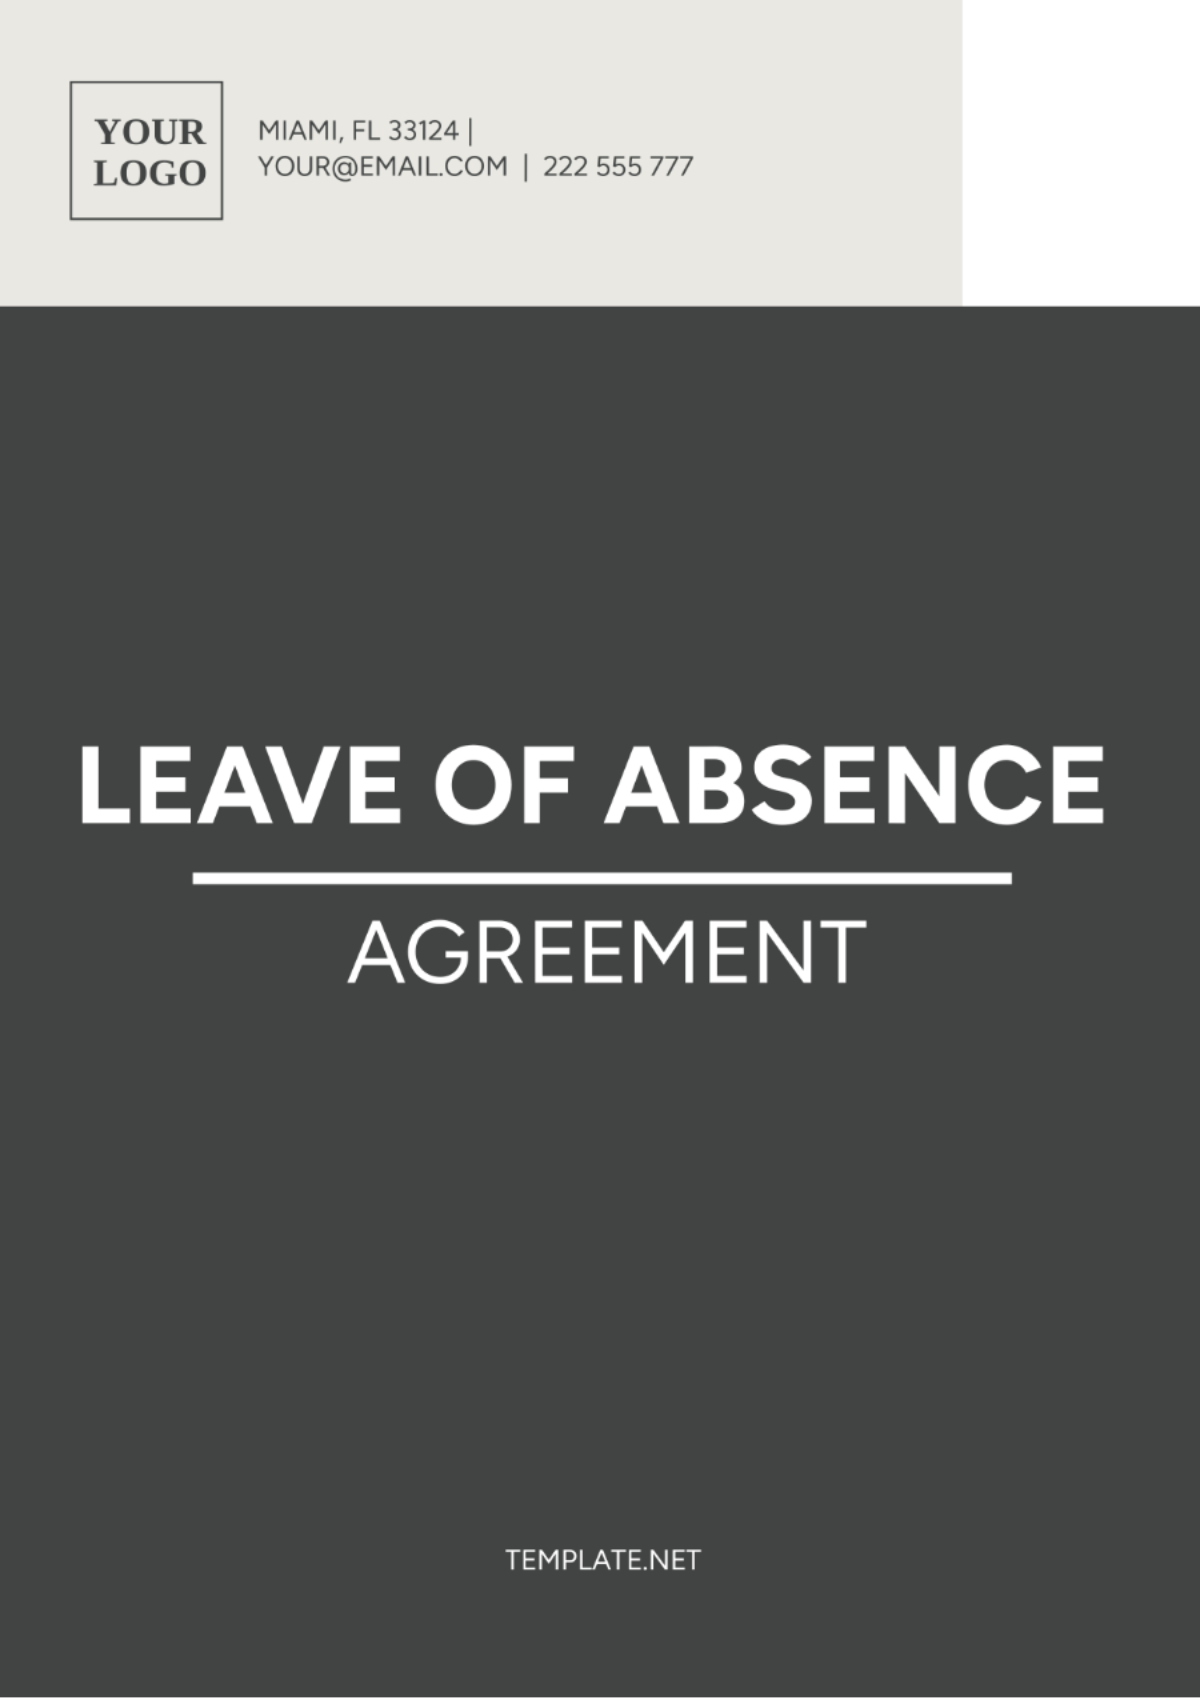 Leave of Absence Agreement Template